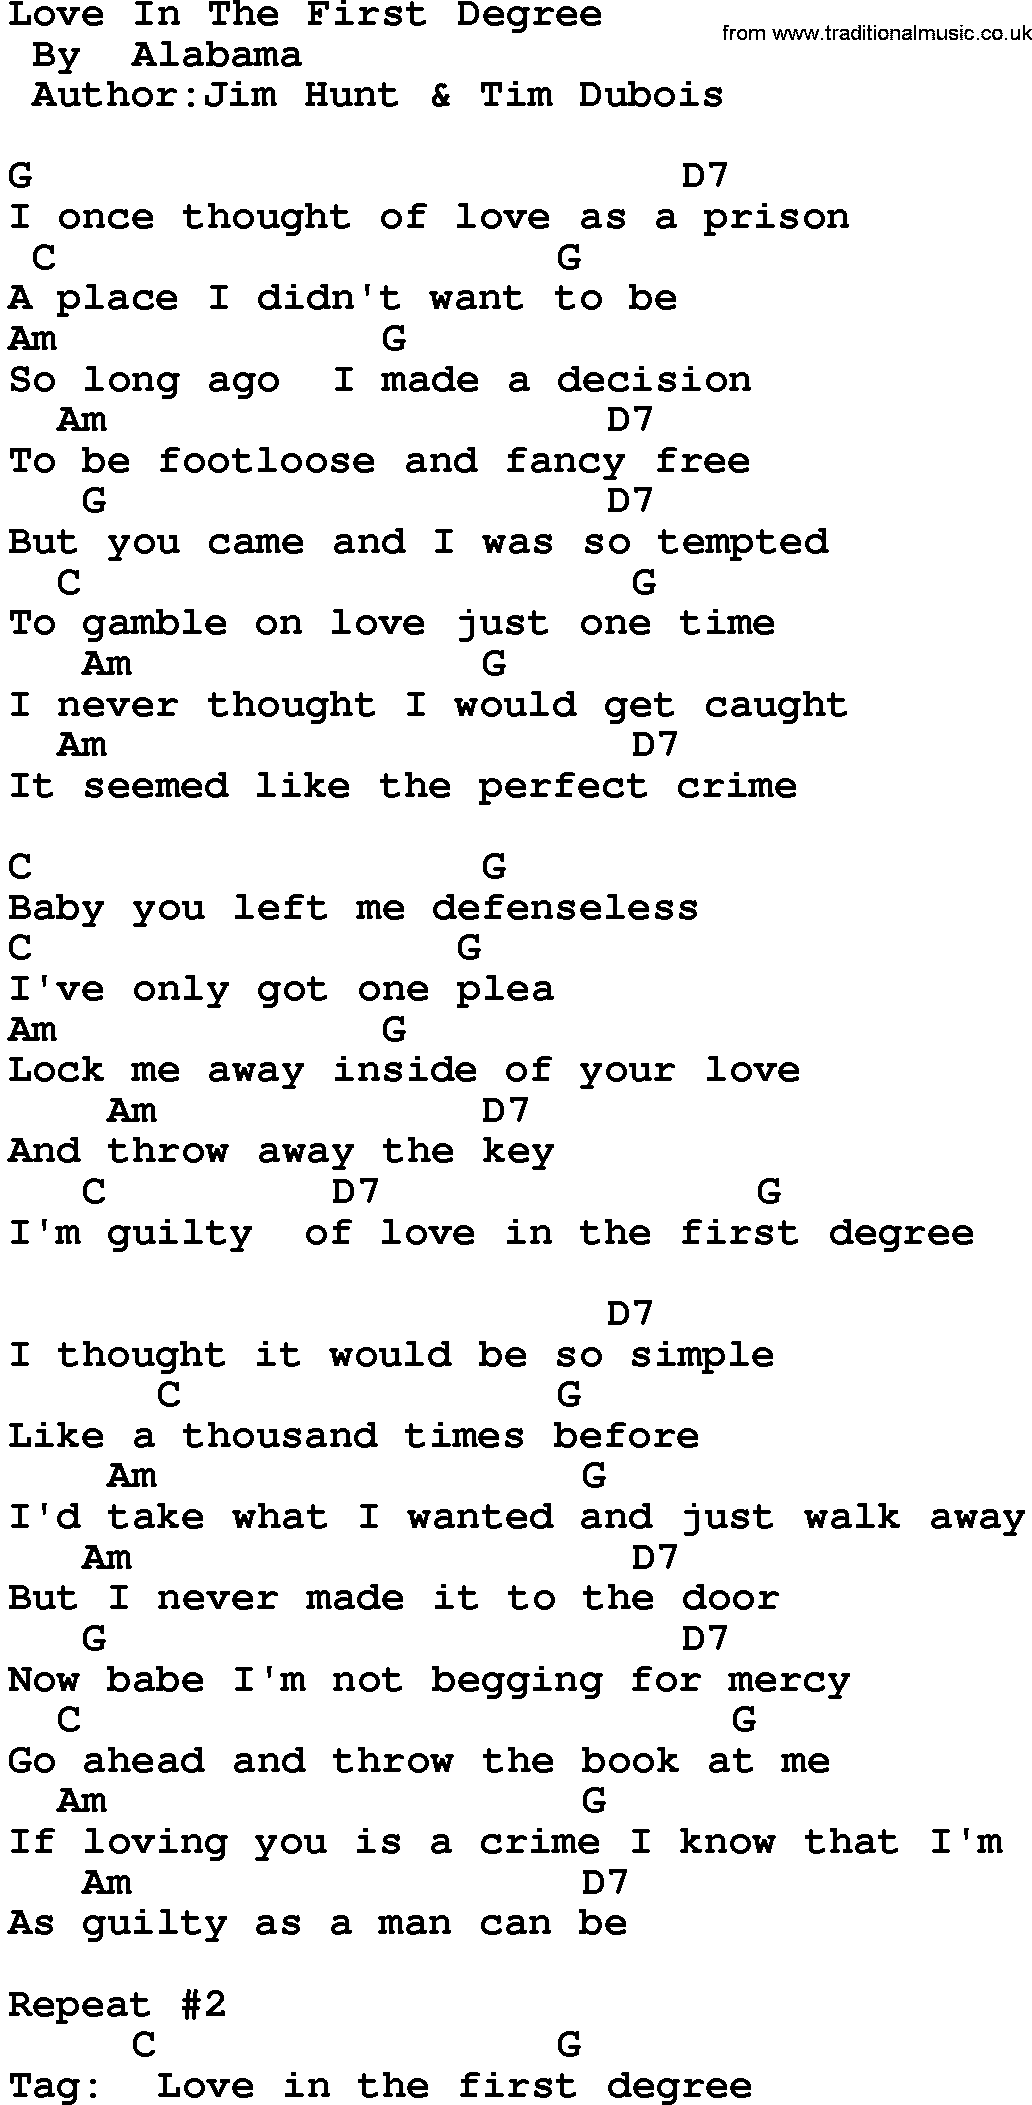 Country music song: Love In The First Degree lyrics and chords